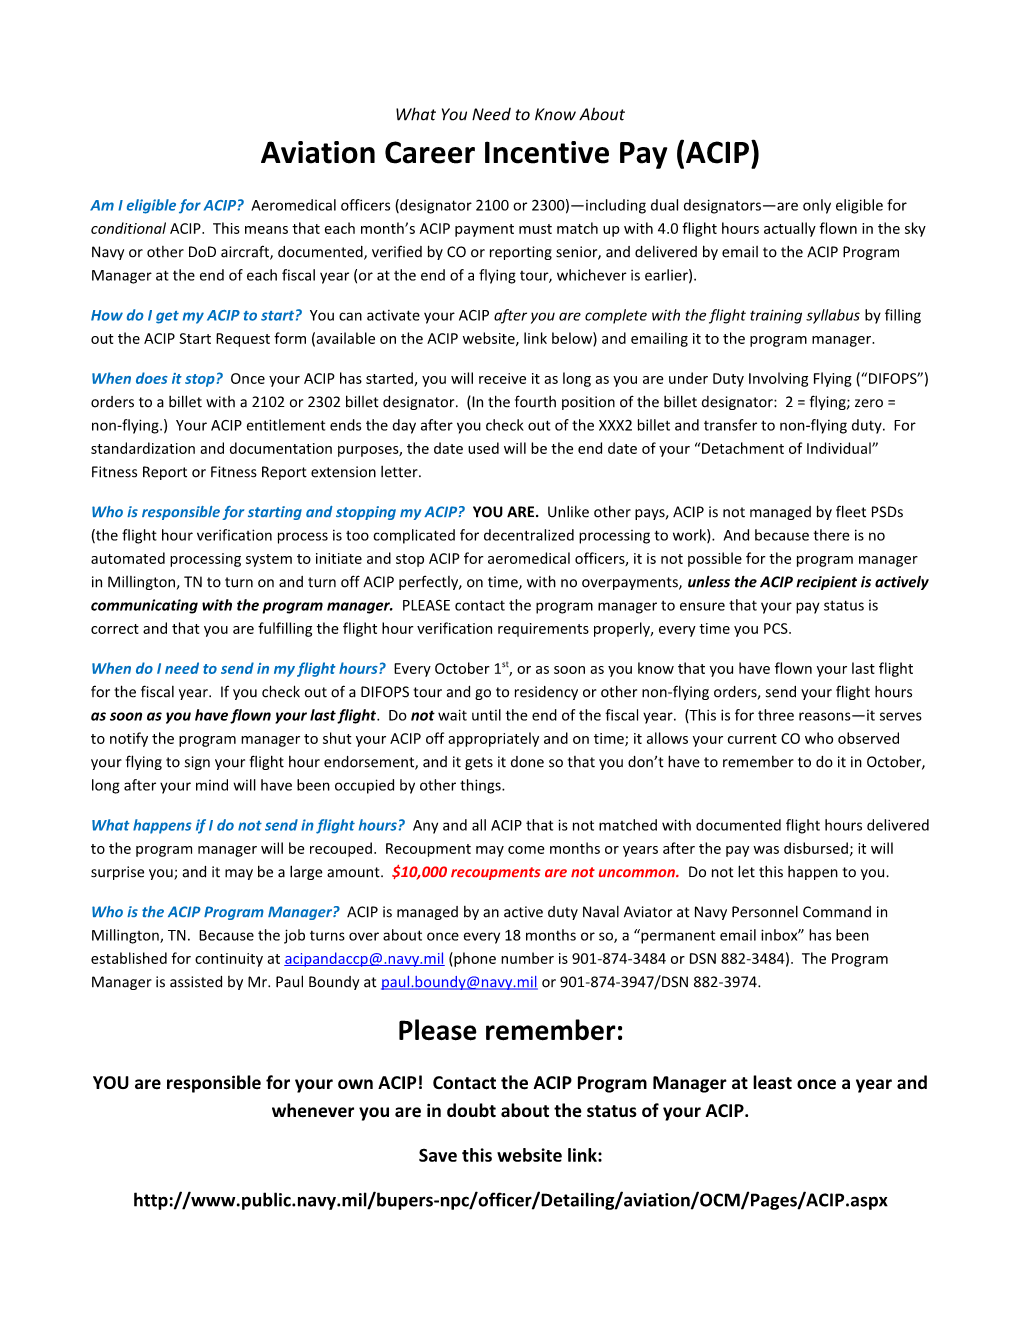 What You Need to Know About Aviation Career Incentive Pay (ACIP)